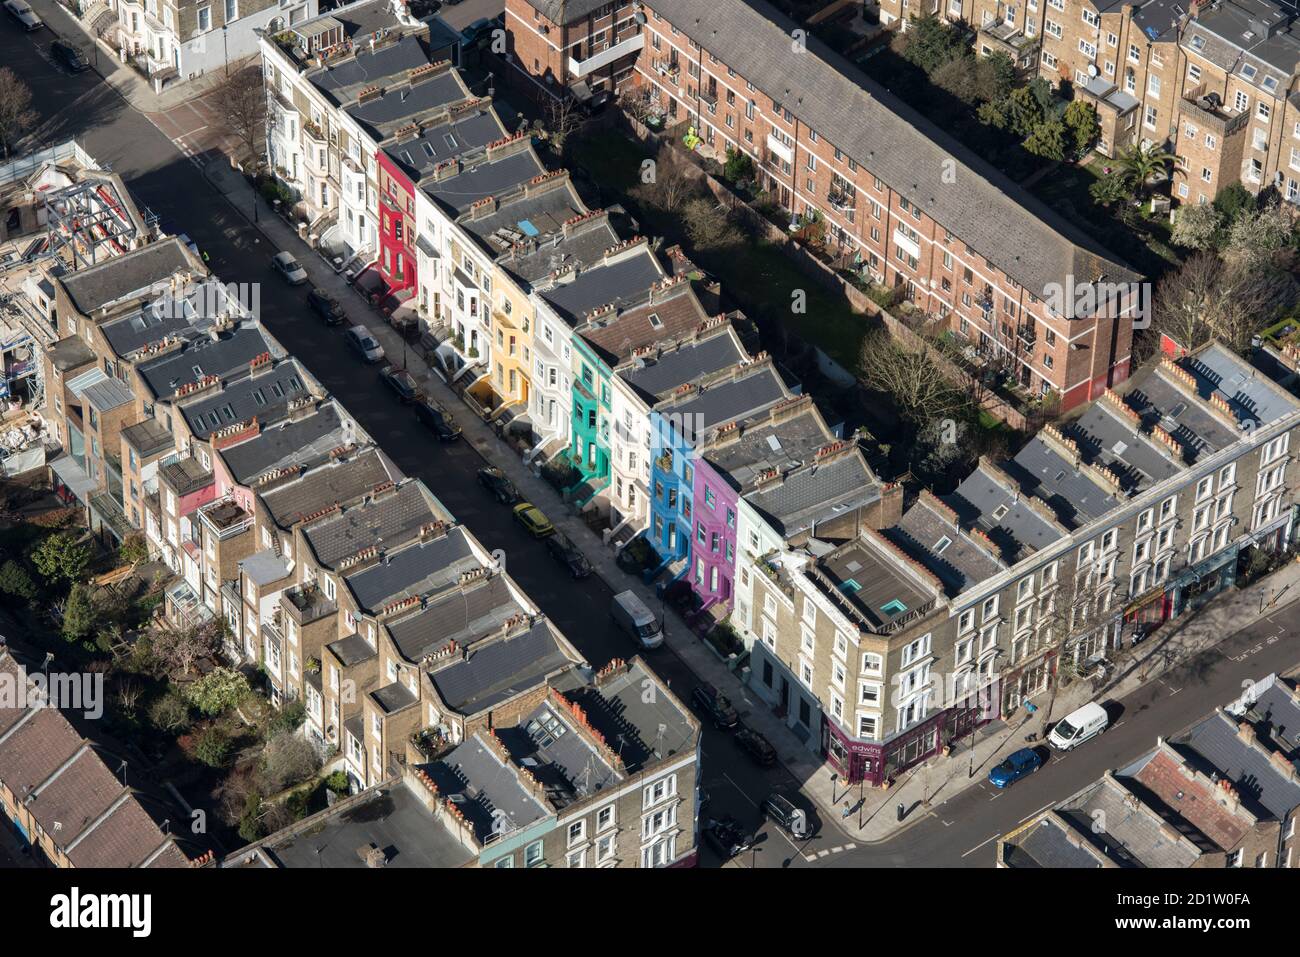 Lancaster Road, Notting Hill, London, 2018, UK. Aerial view. Stock Photo